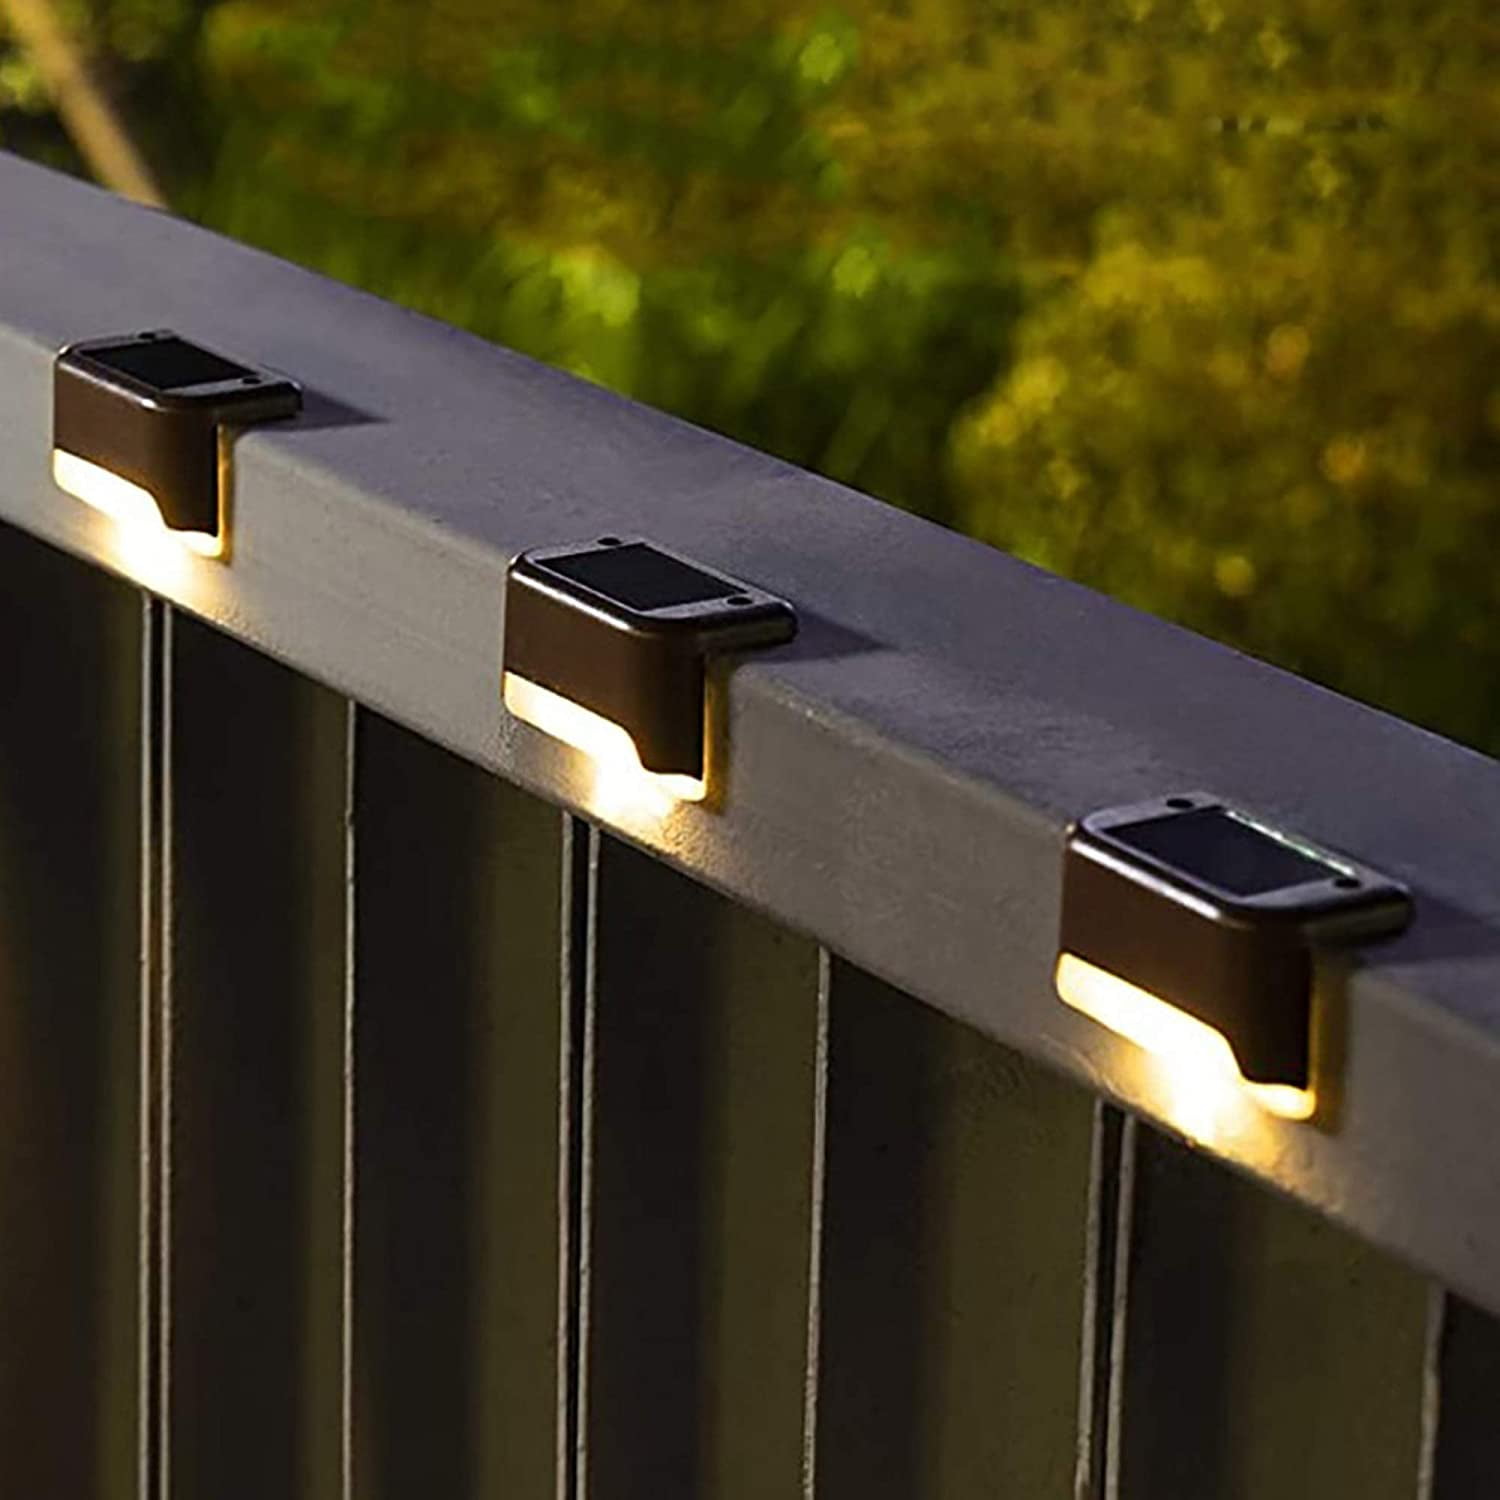 Solar Deck Lights Outdoor 8 Pack 30 LED Wireless Stainless Steel Step Stairs Lamps Bright Security Lights for Patio Garden Pathway Walkway Security Lamps Cool White